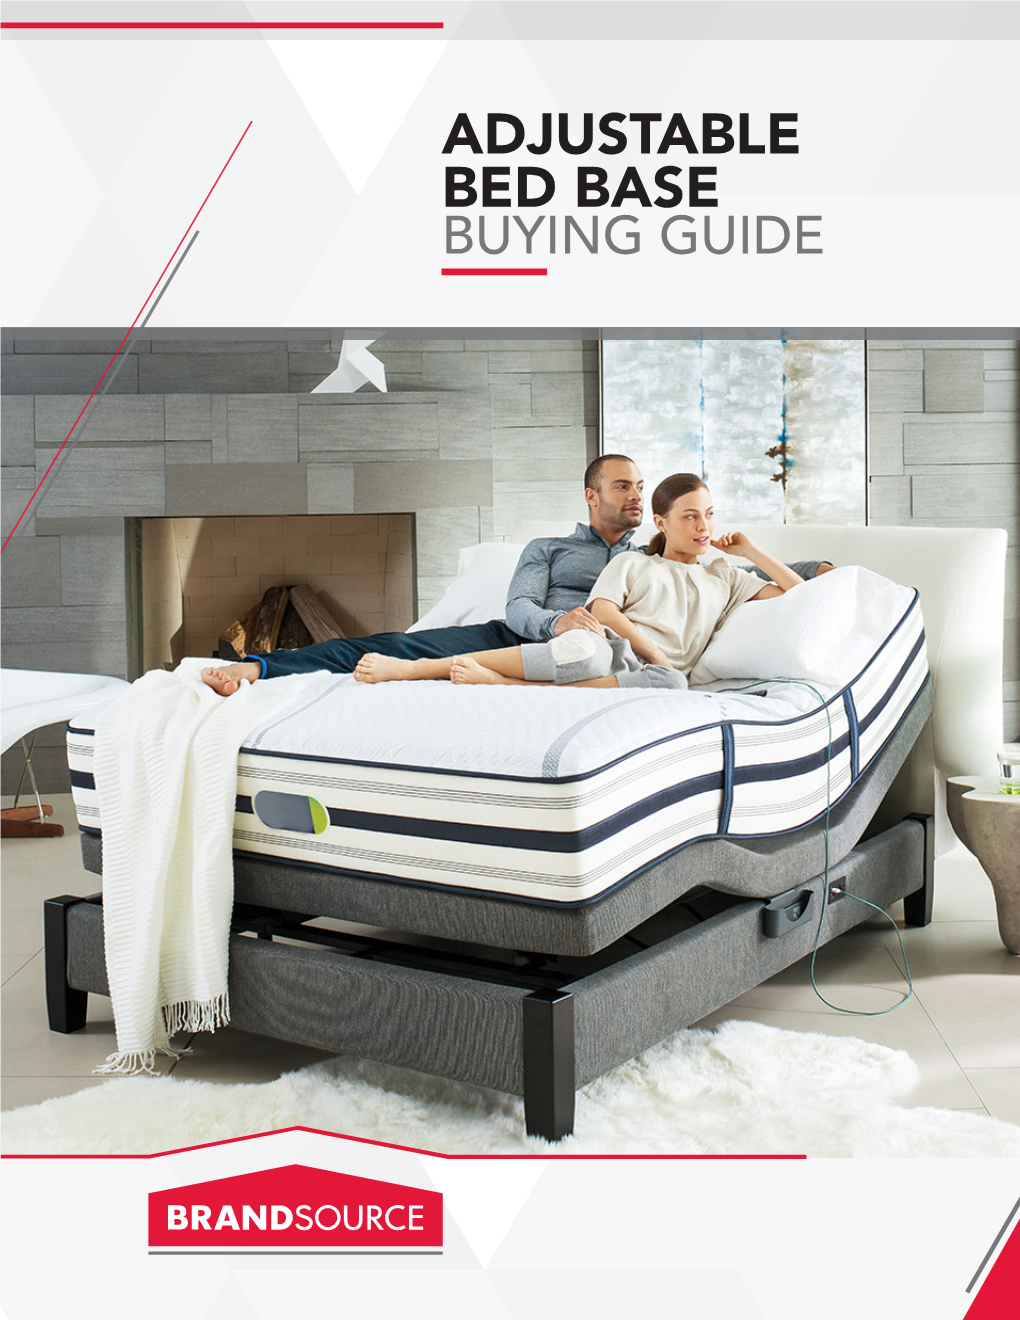 Adjustable Bed Base Buying Guide Contents